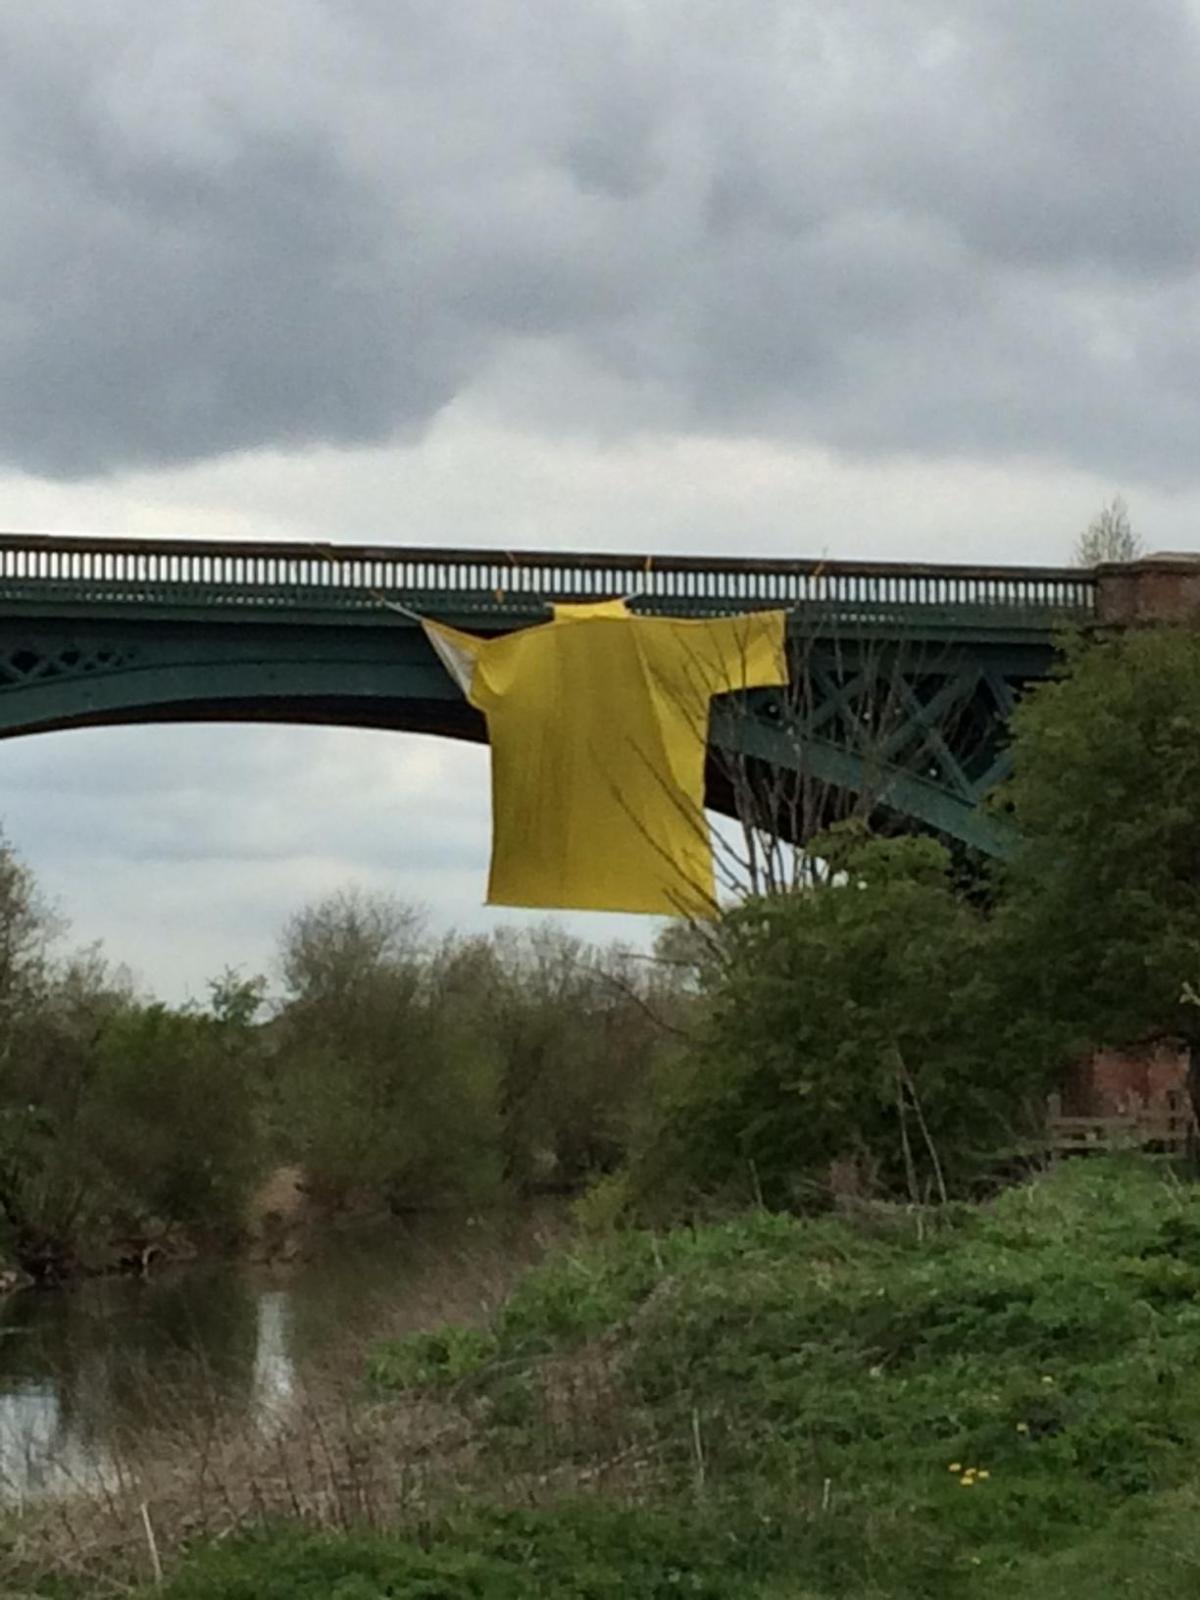 "This fabulous huge, yellow jersey appeared on our historic viaduct in Stamford Bridge. It  appears to have been missed by many - what a great sight. Who had materminded this great stunt was a mystery for days, although the phantom jersey hangers have now